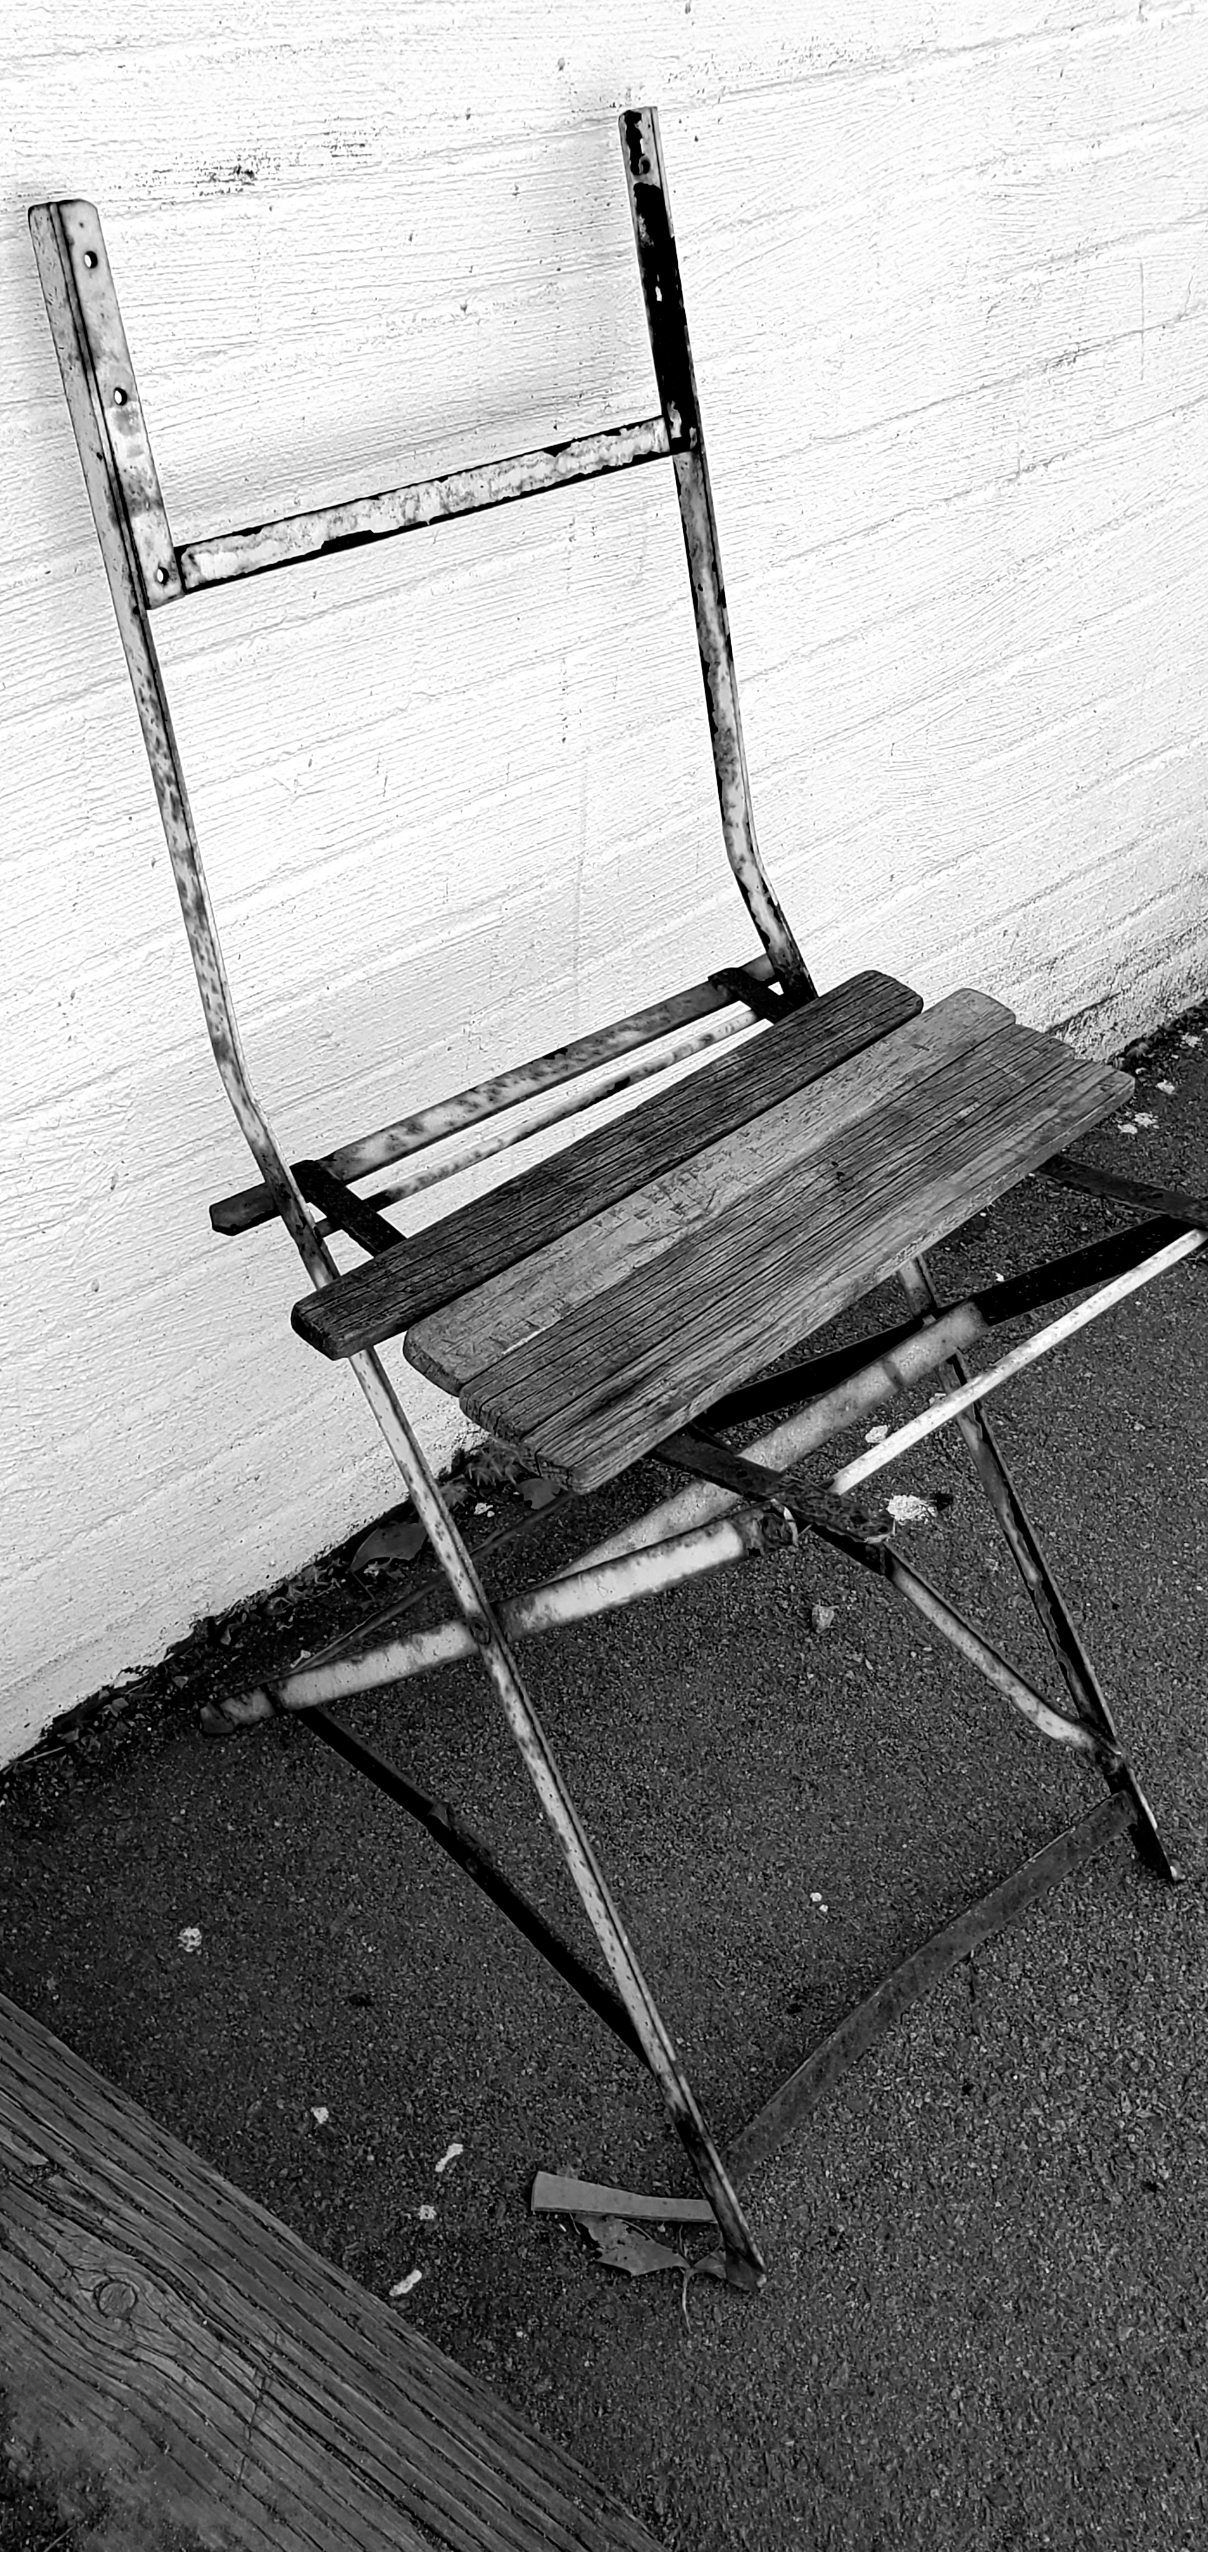 rusted metal folding chair frame with a few wooden boards across the seat